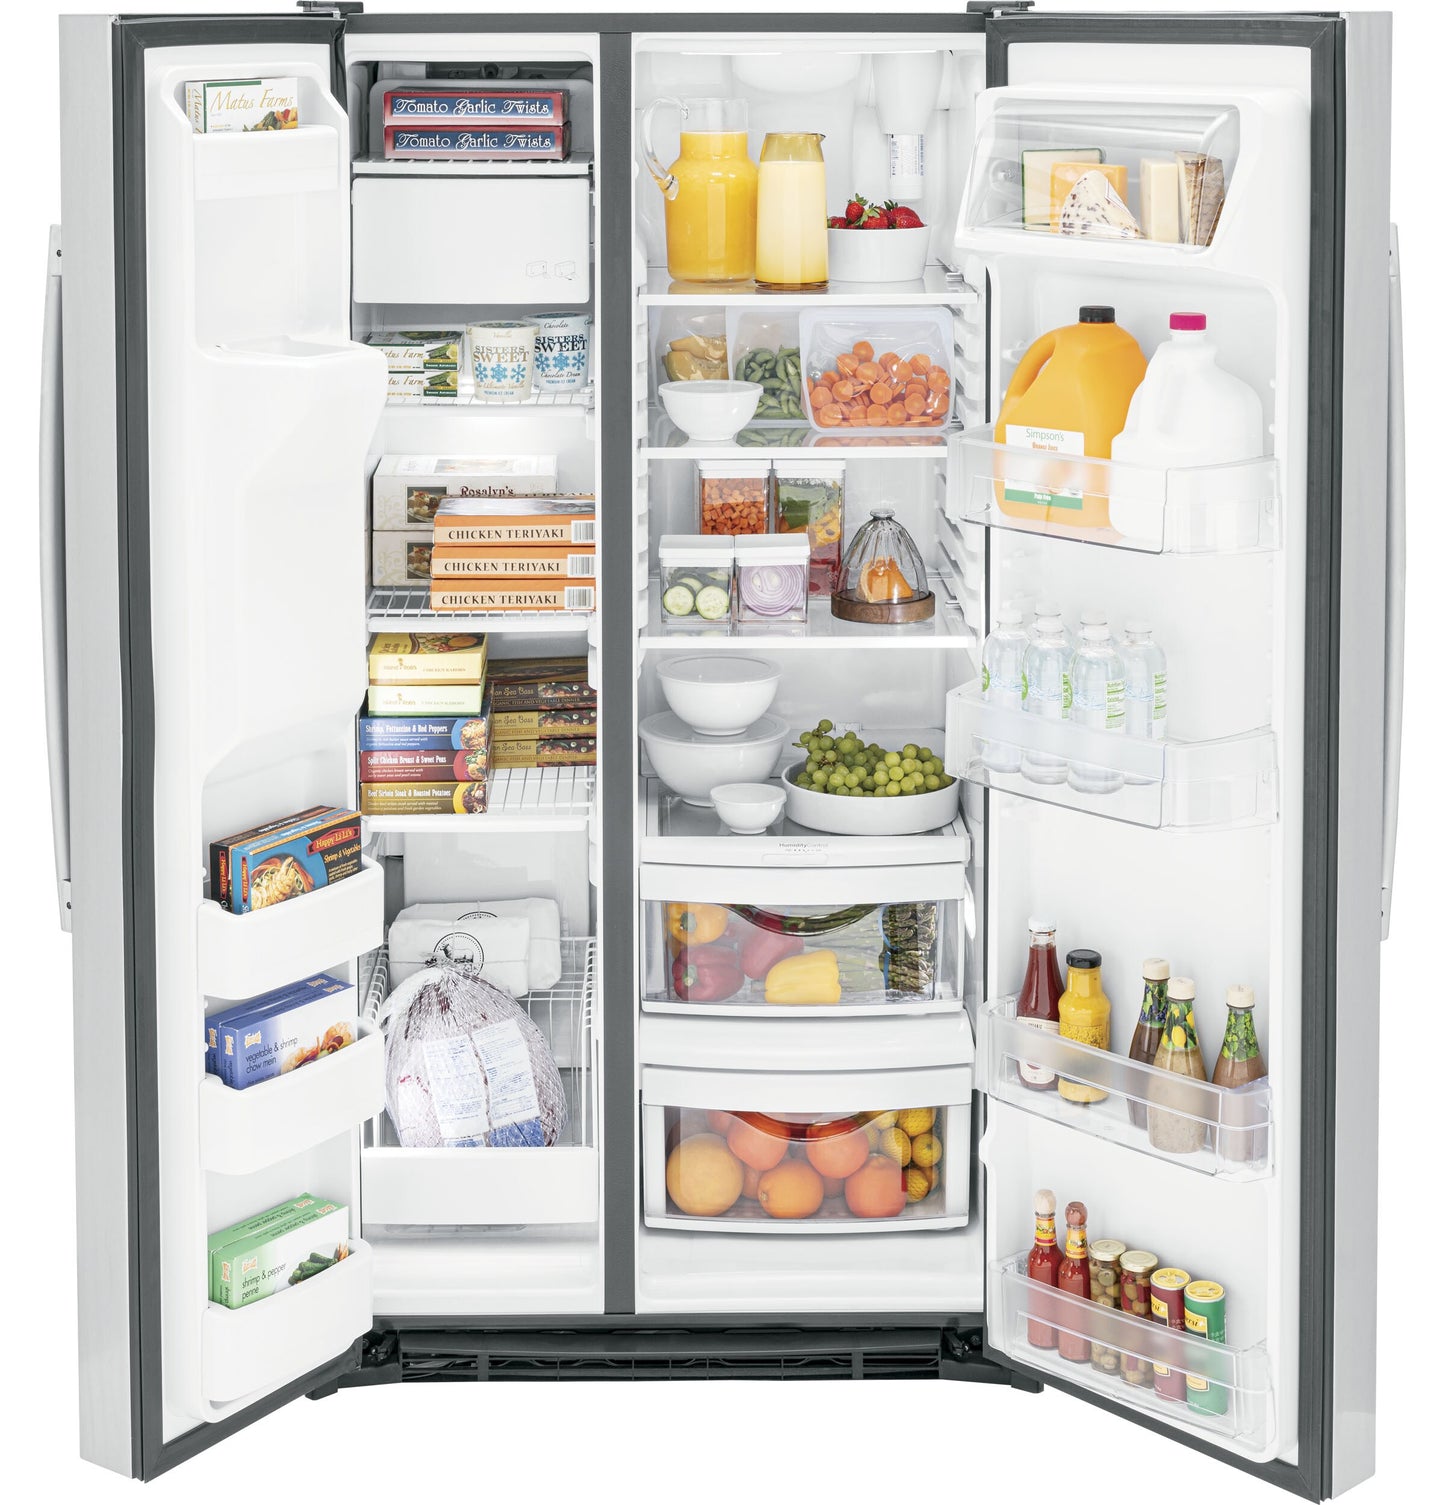 OPEN BOX GE Side-by-Side 25.3-cu ft Refrigerator & 30-in Self-Cleaning Electric Range in Stainless Steel